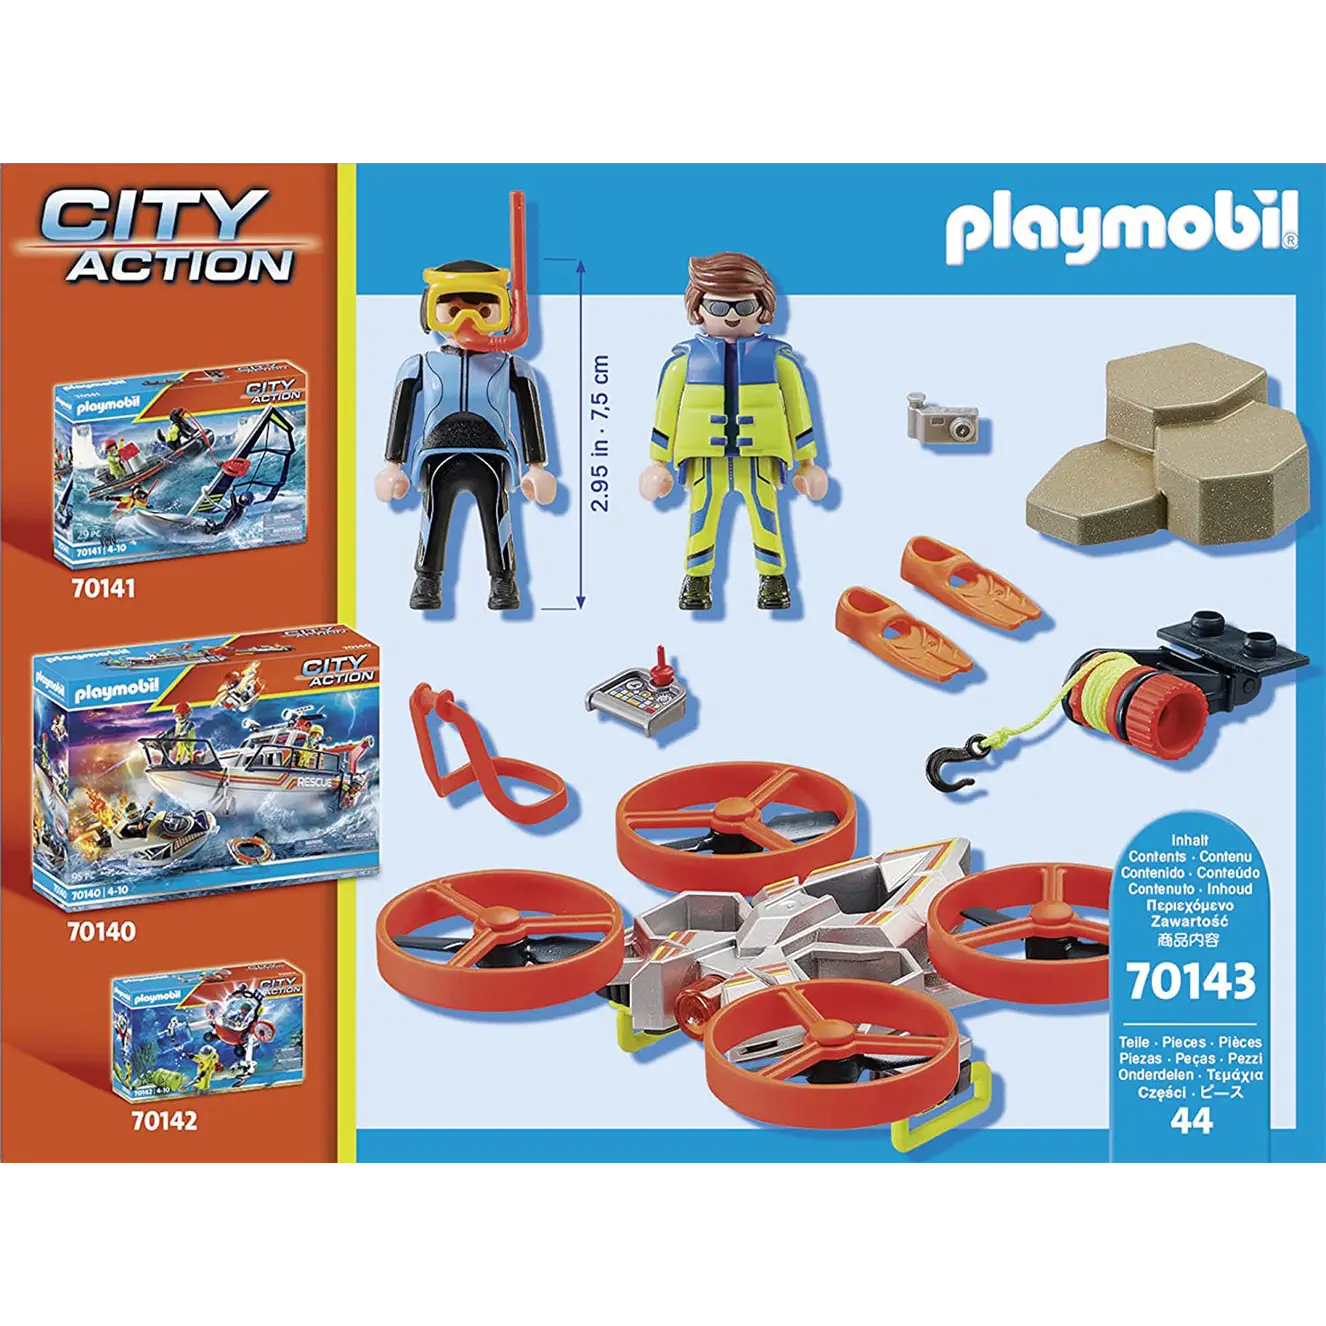 Playmobil Diver Rescue with Drone 70143 (For Kids 4 to 10